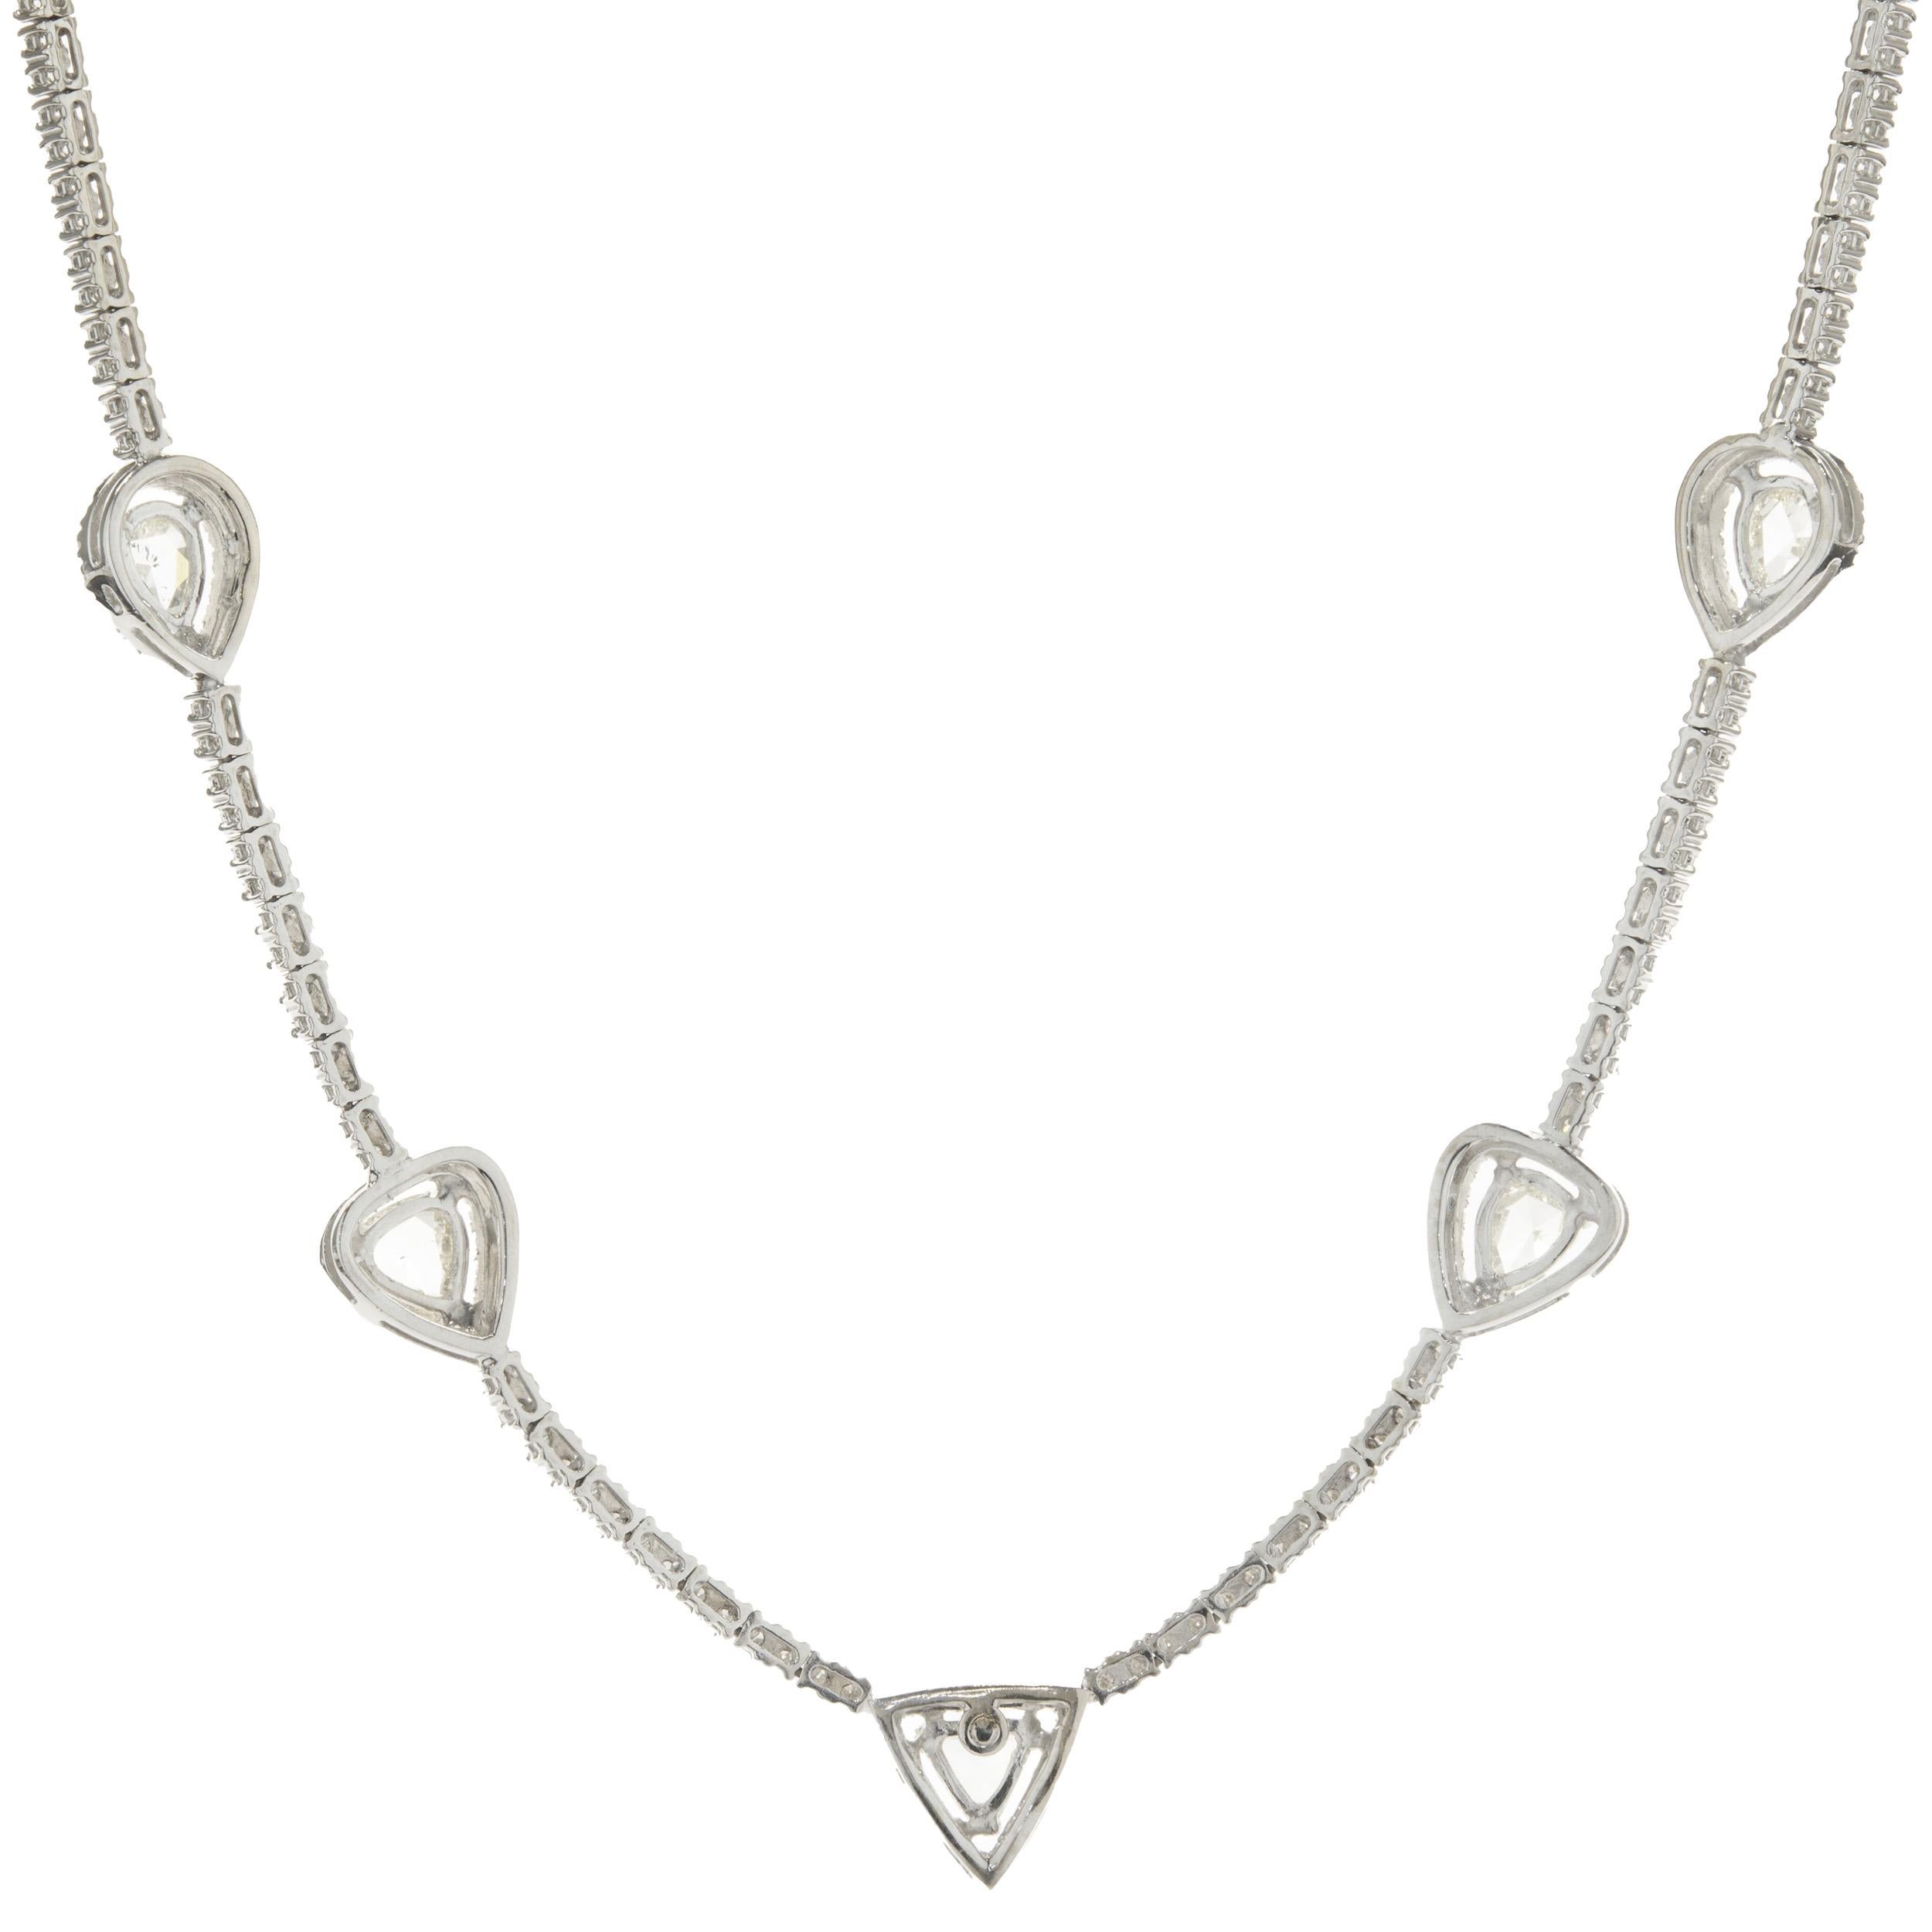 Round Cut 14 Karat White Gold Diamond Tennis Necklace with Rose Cut Diamond Stations For Sale